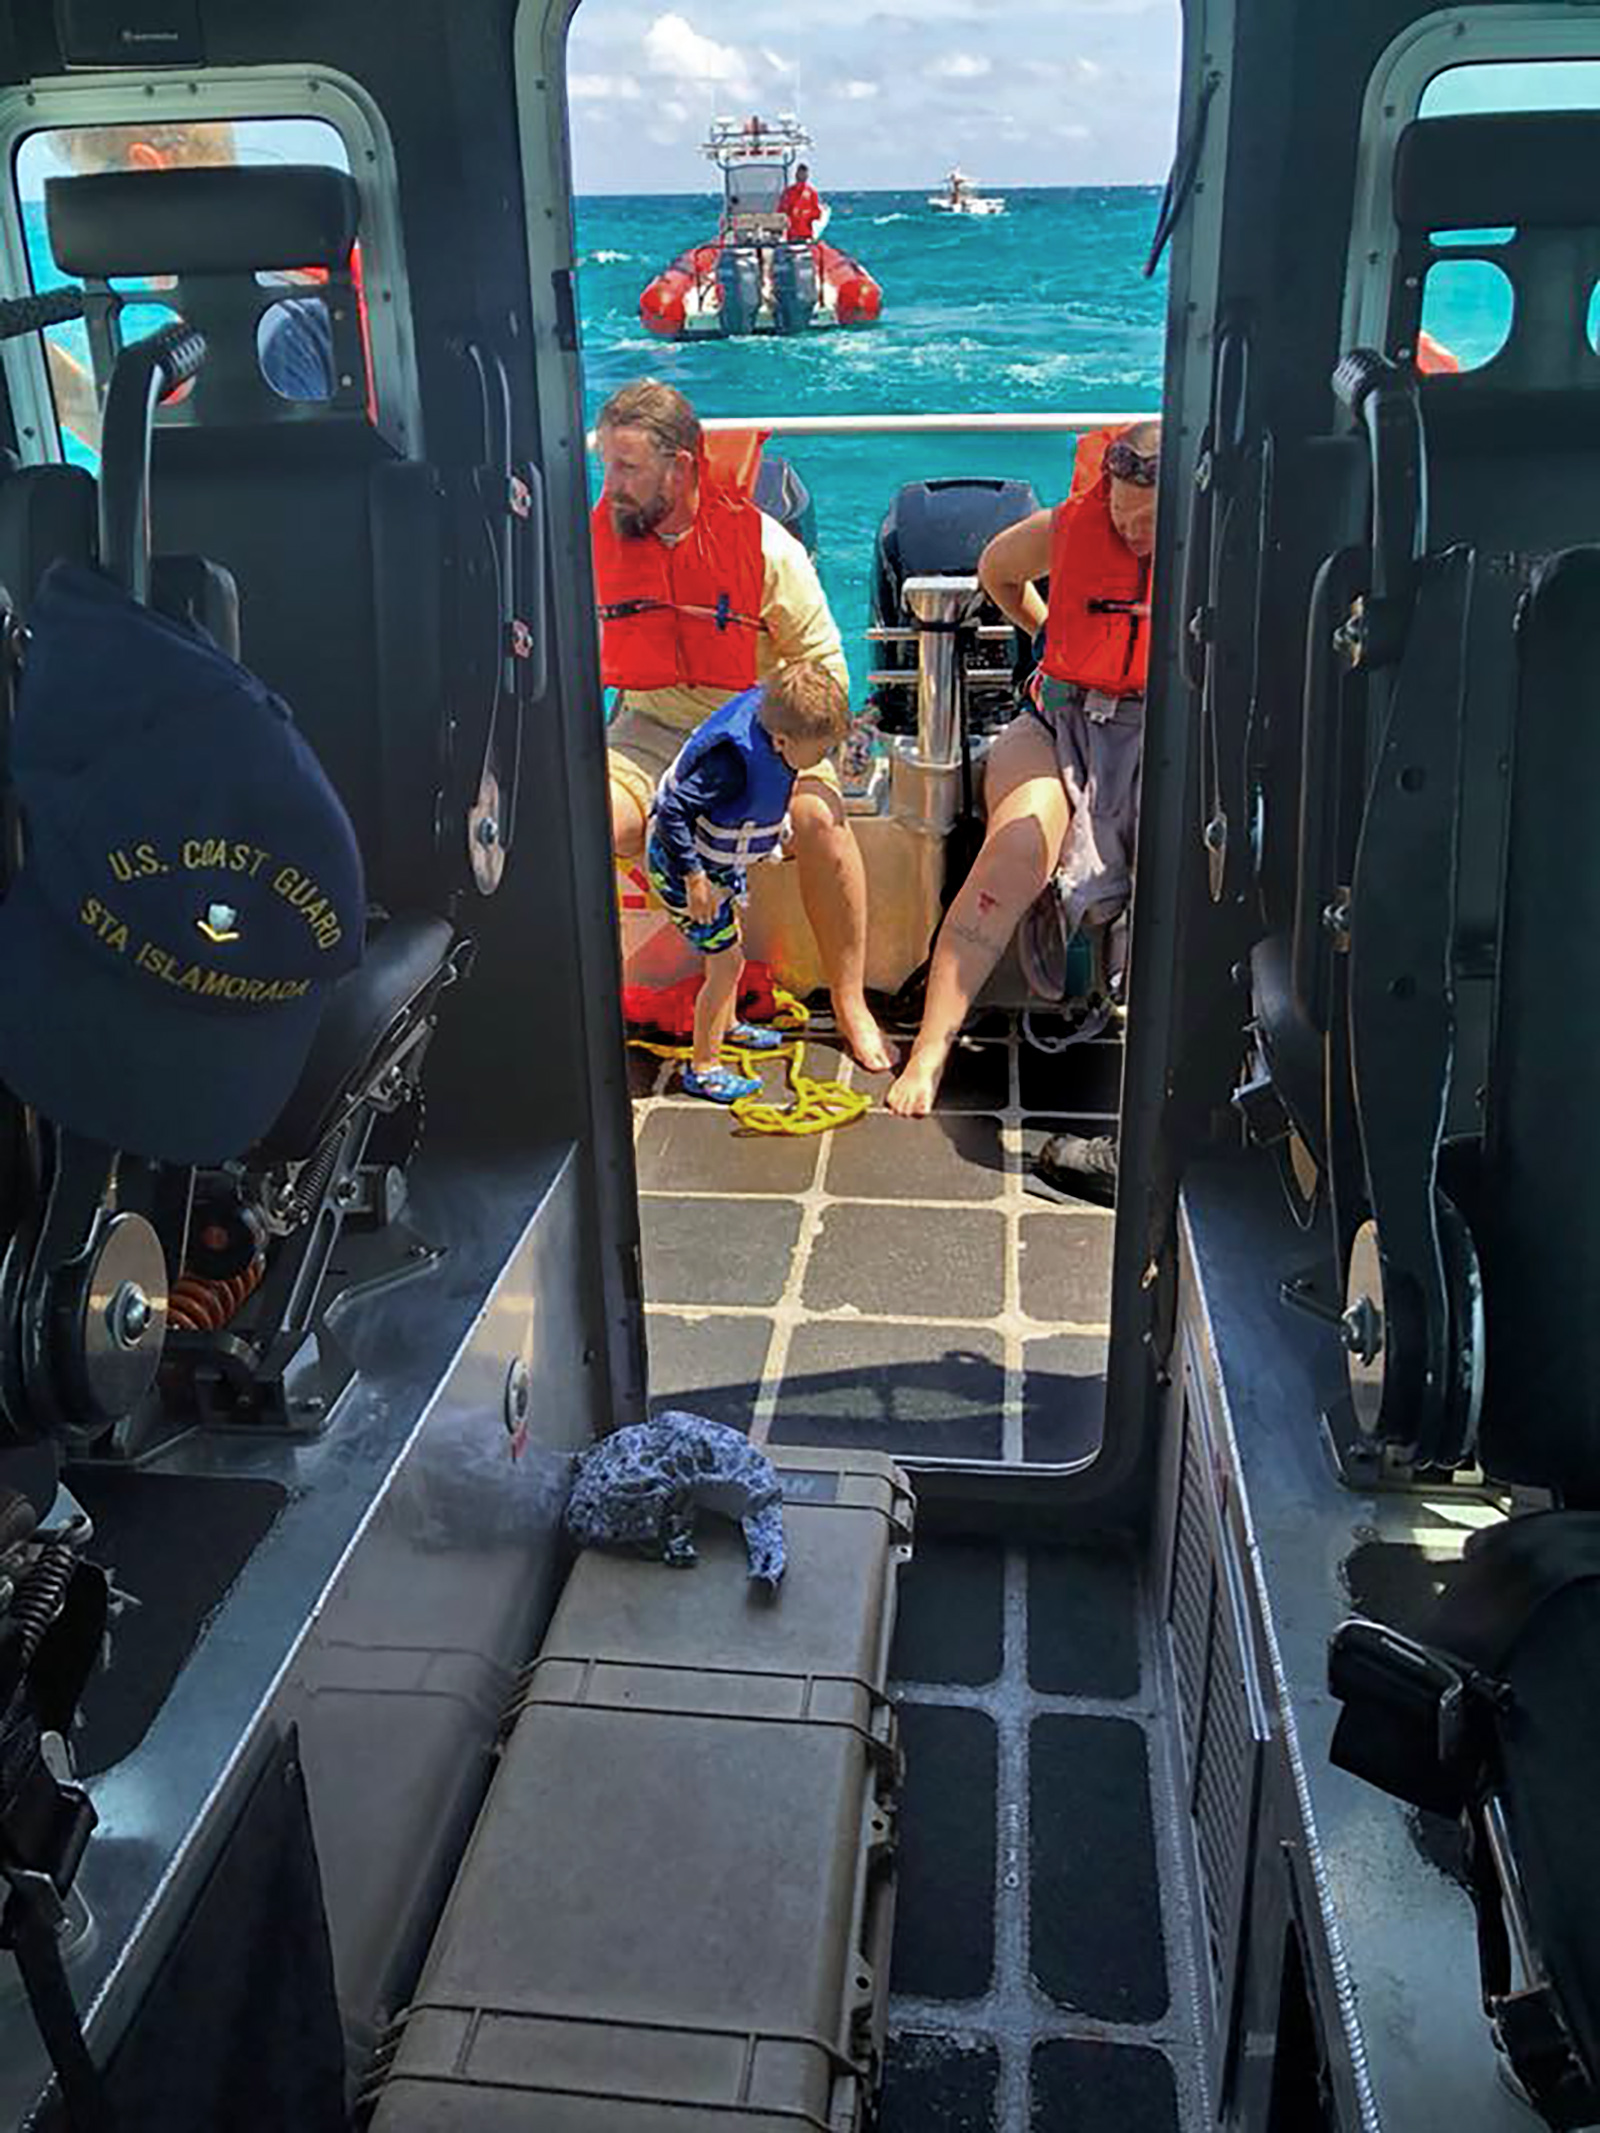 PHOTO: The U.S. Coast Guard Station Islamorada in Florida shared this image of part of a group of six who were retrieved from a capsized boat in the vicinity of Conch Reef with the help of Good Samaritans on April 7, 2018.